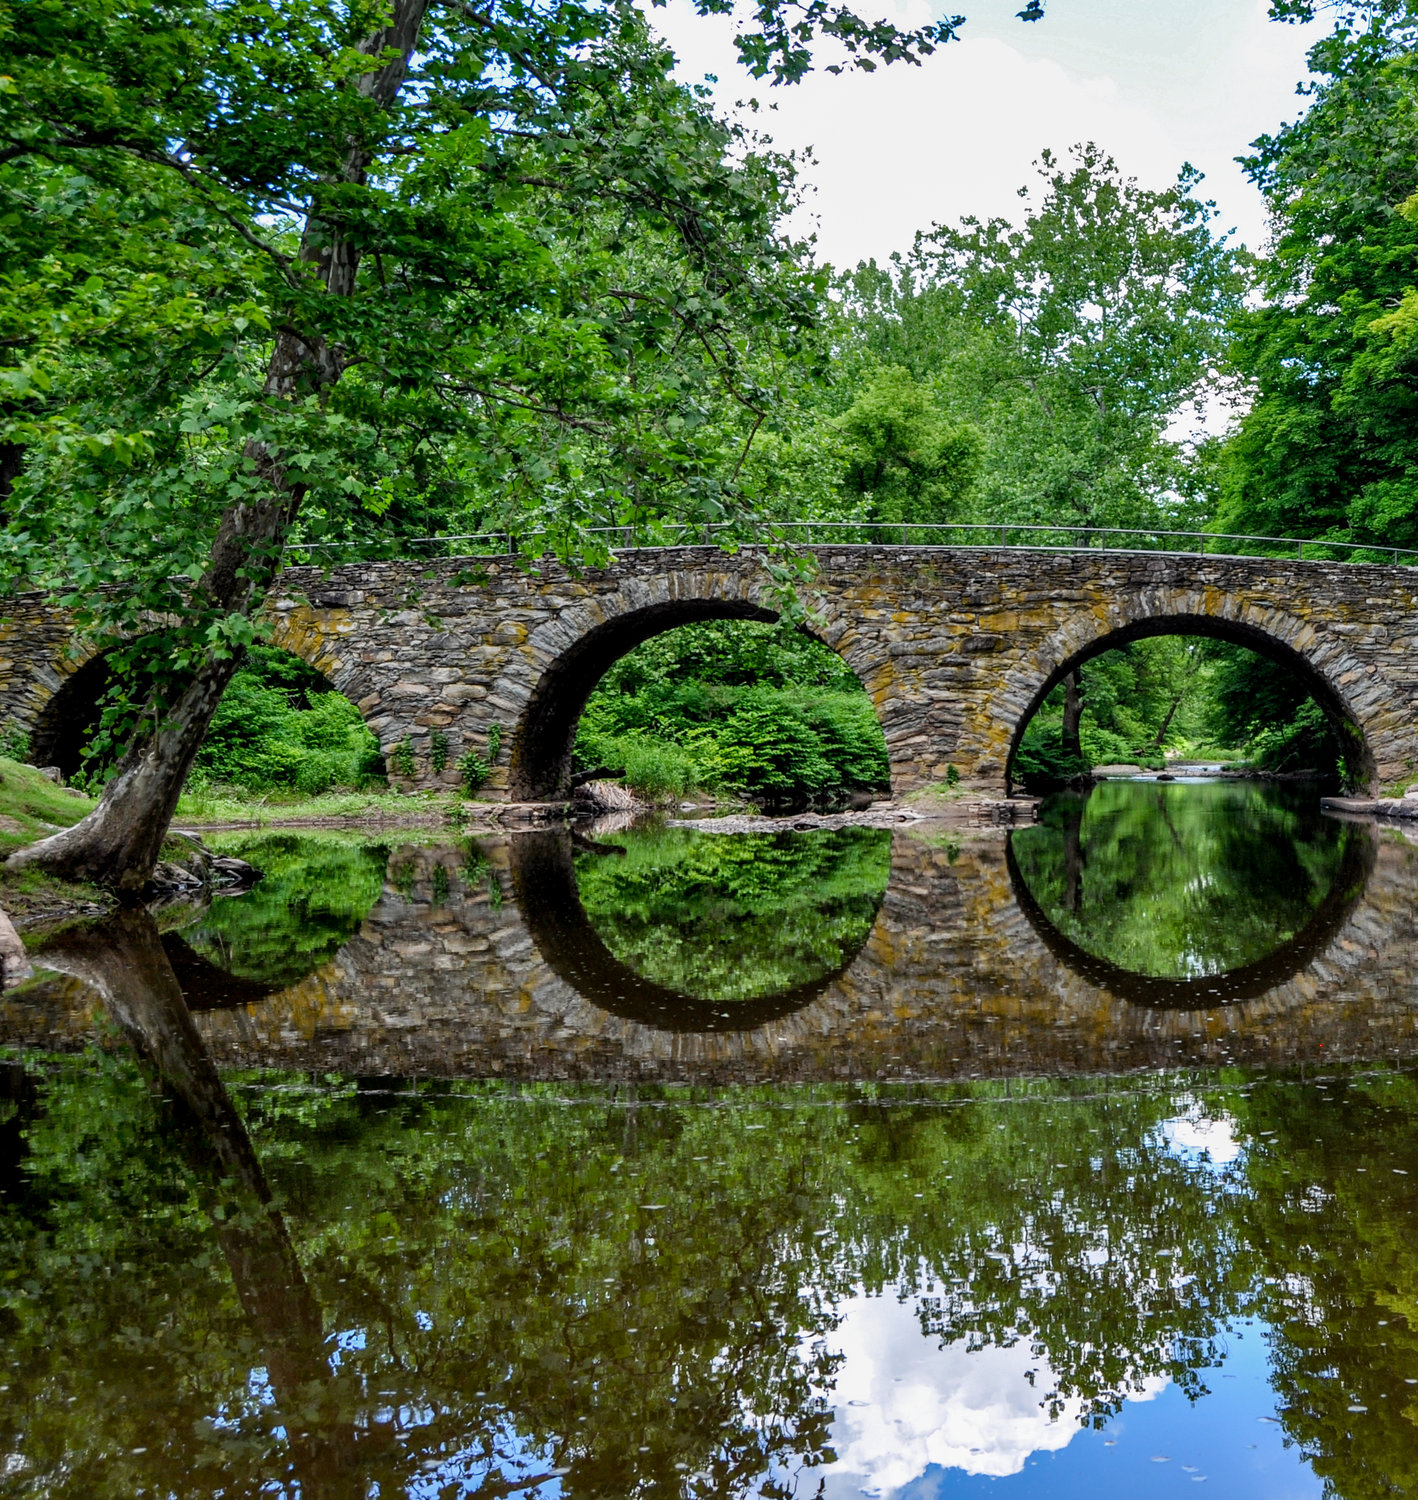 Photographers from around the globe travel to Kenoza Lake’s Stone Arch Bridge just for this very reason. Yes, the trees are that green. Scout’s honor!